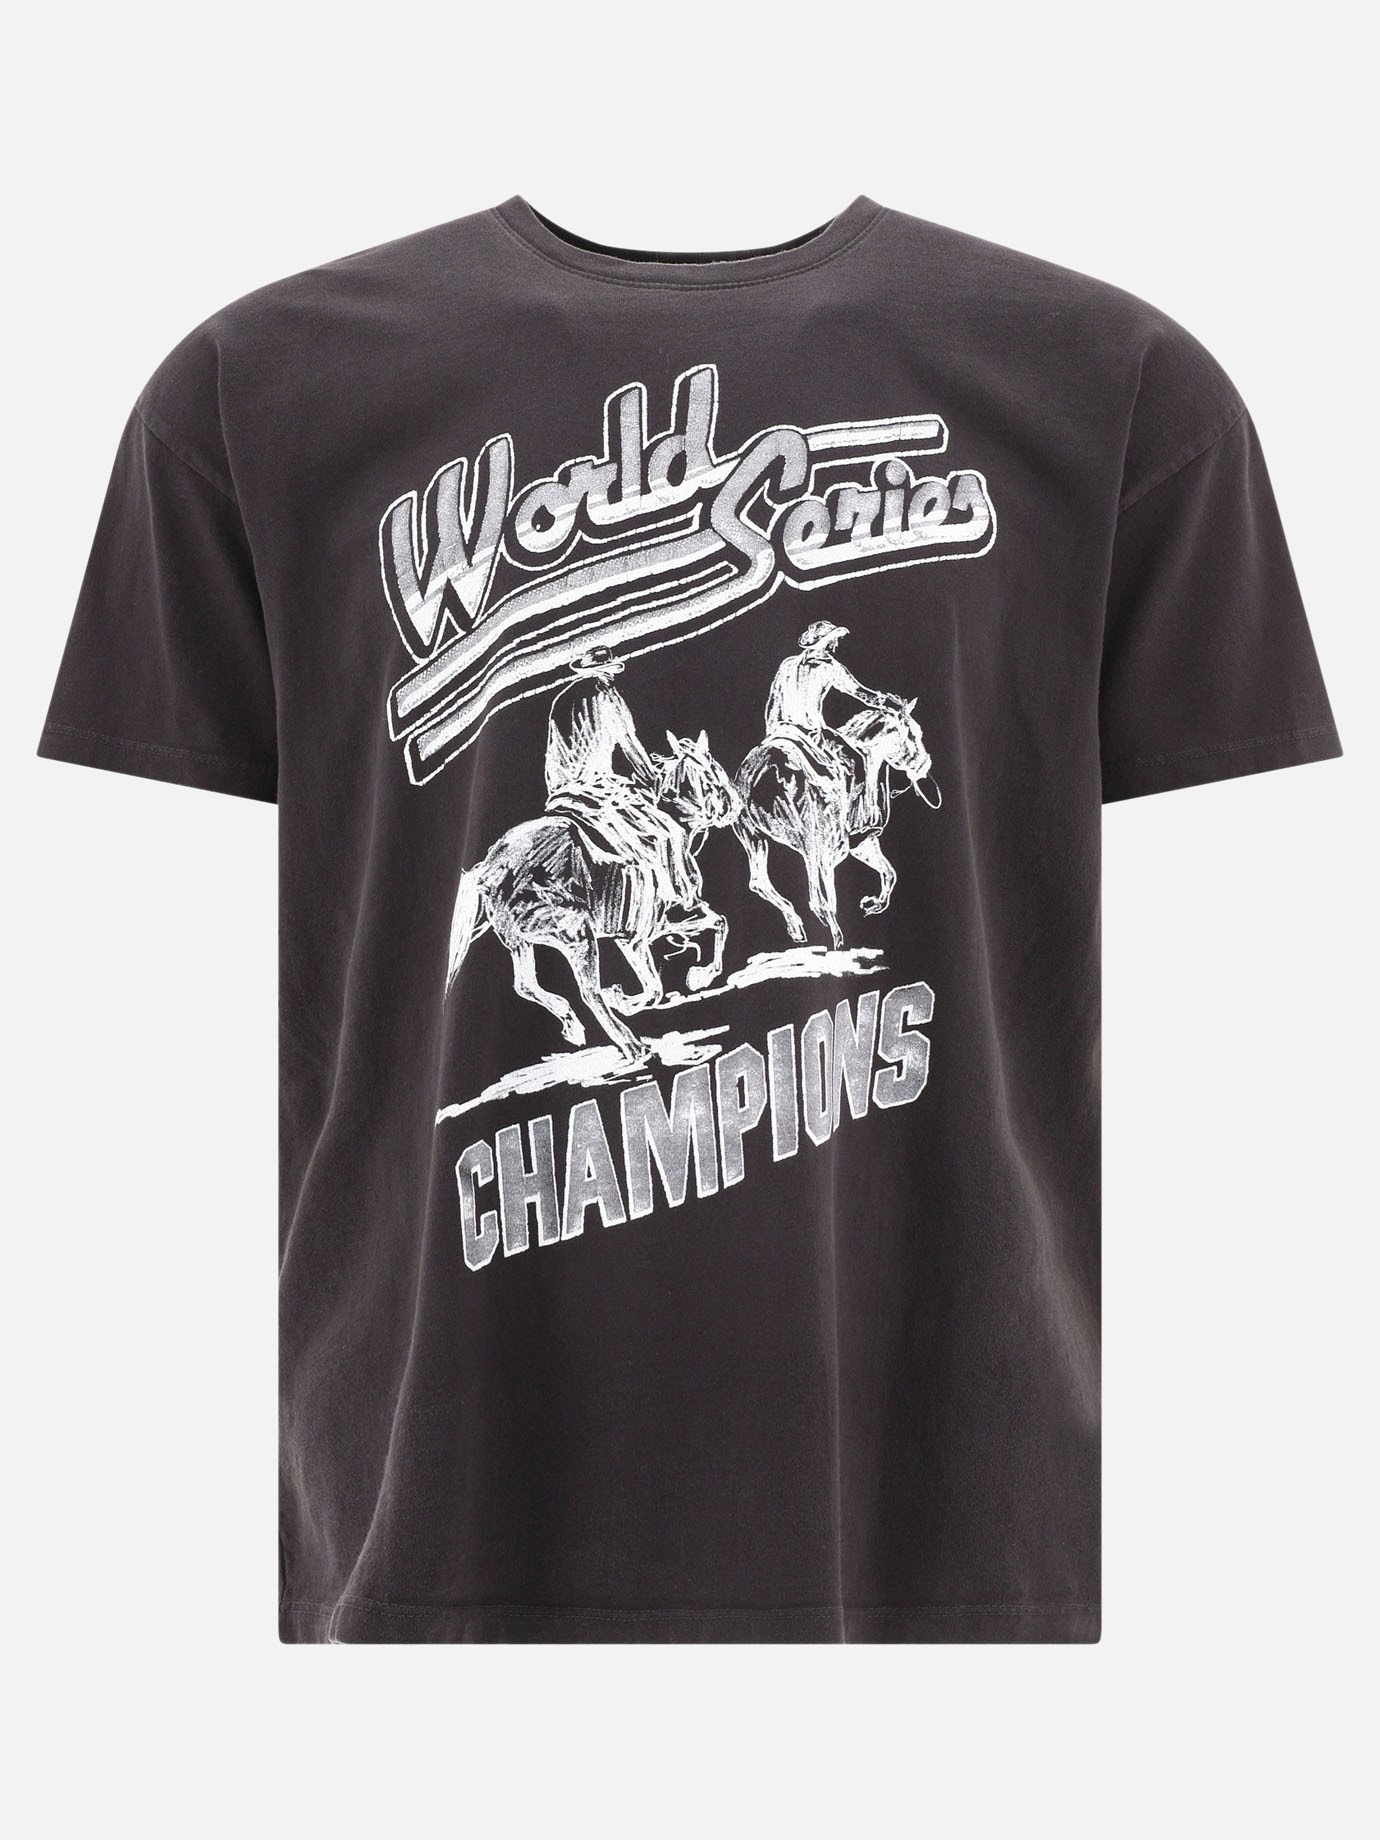 T-shirt  Worls Series Champions by One Of These Days - 2